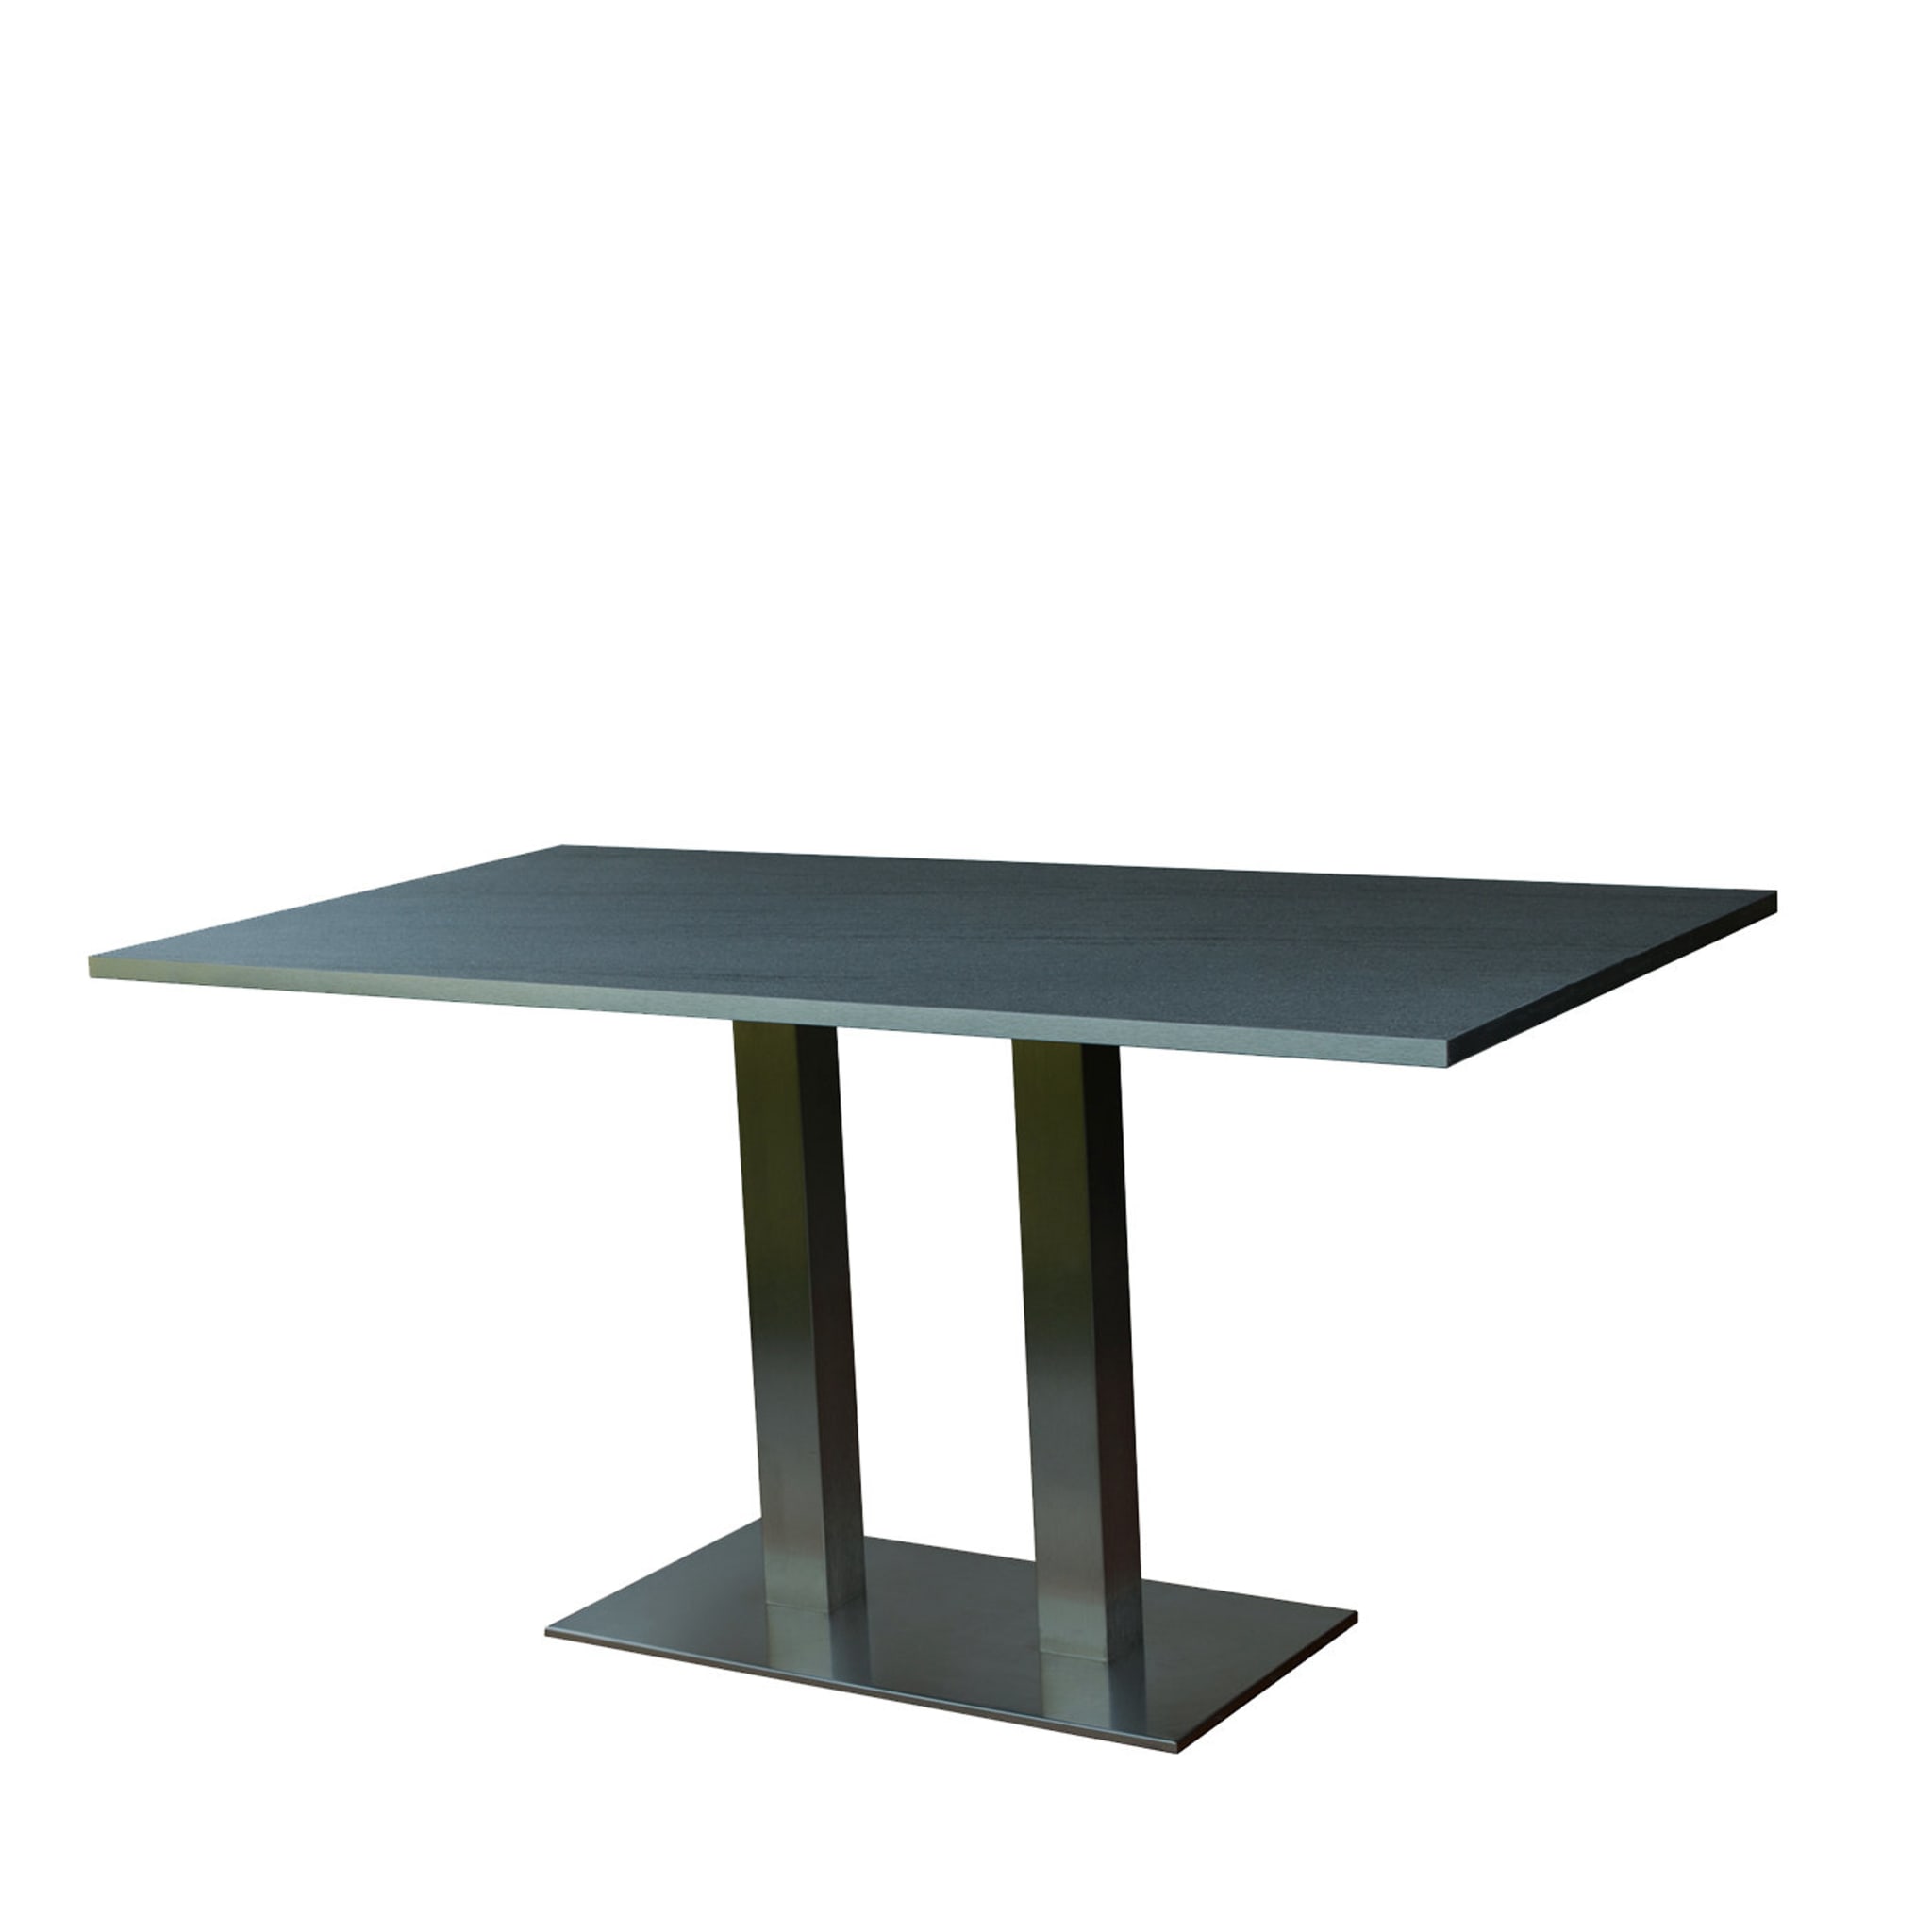 Manchester Table - Alternative view 1